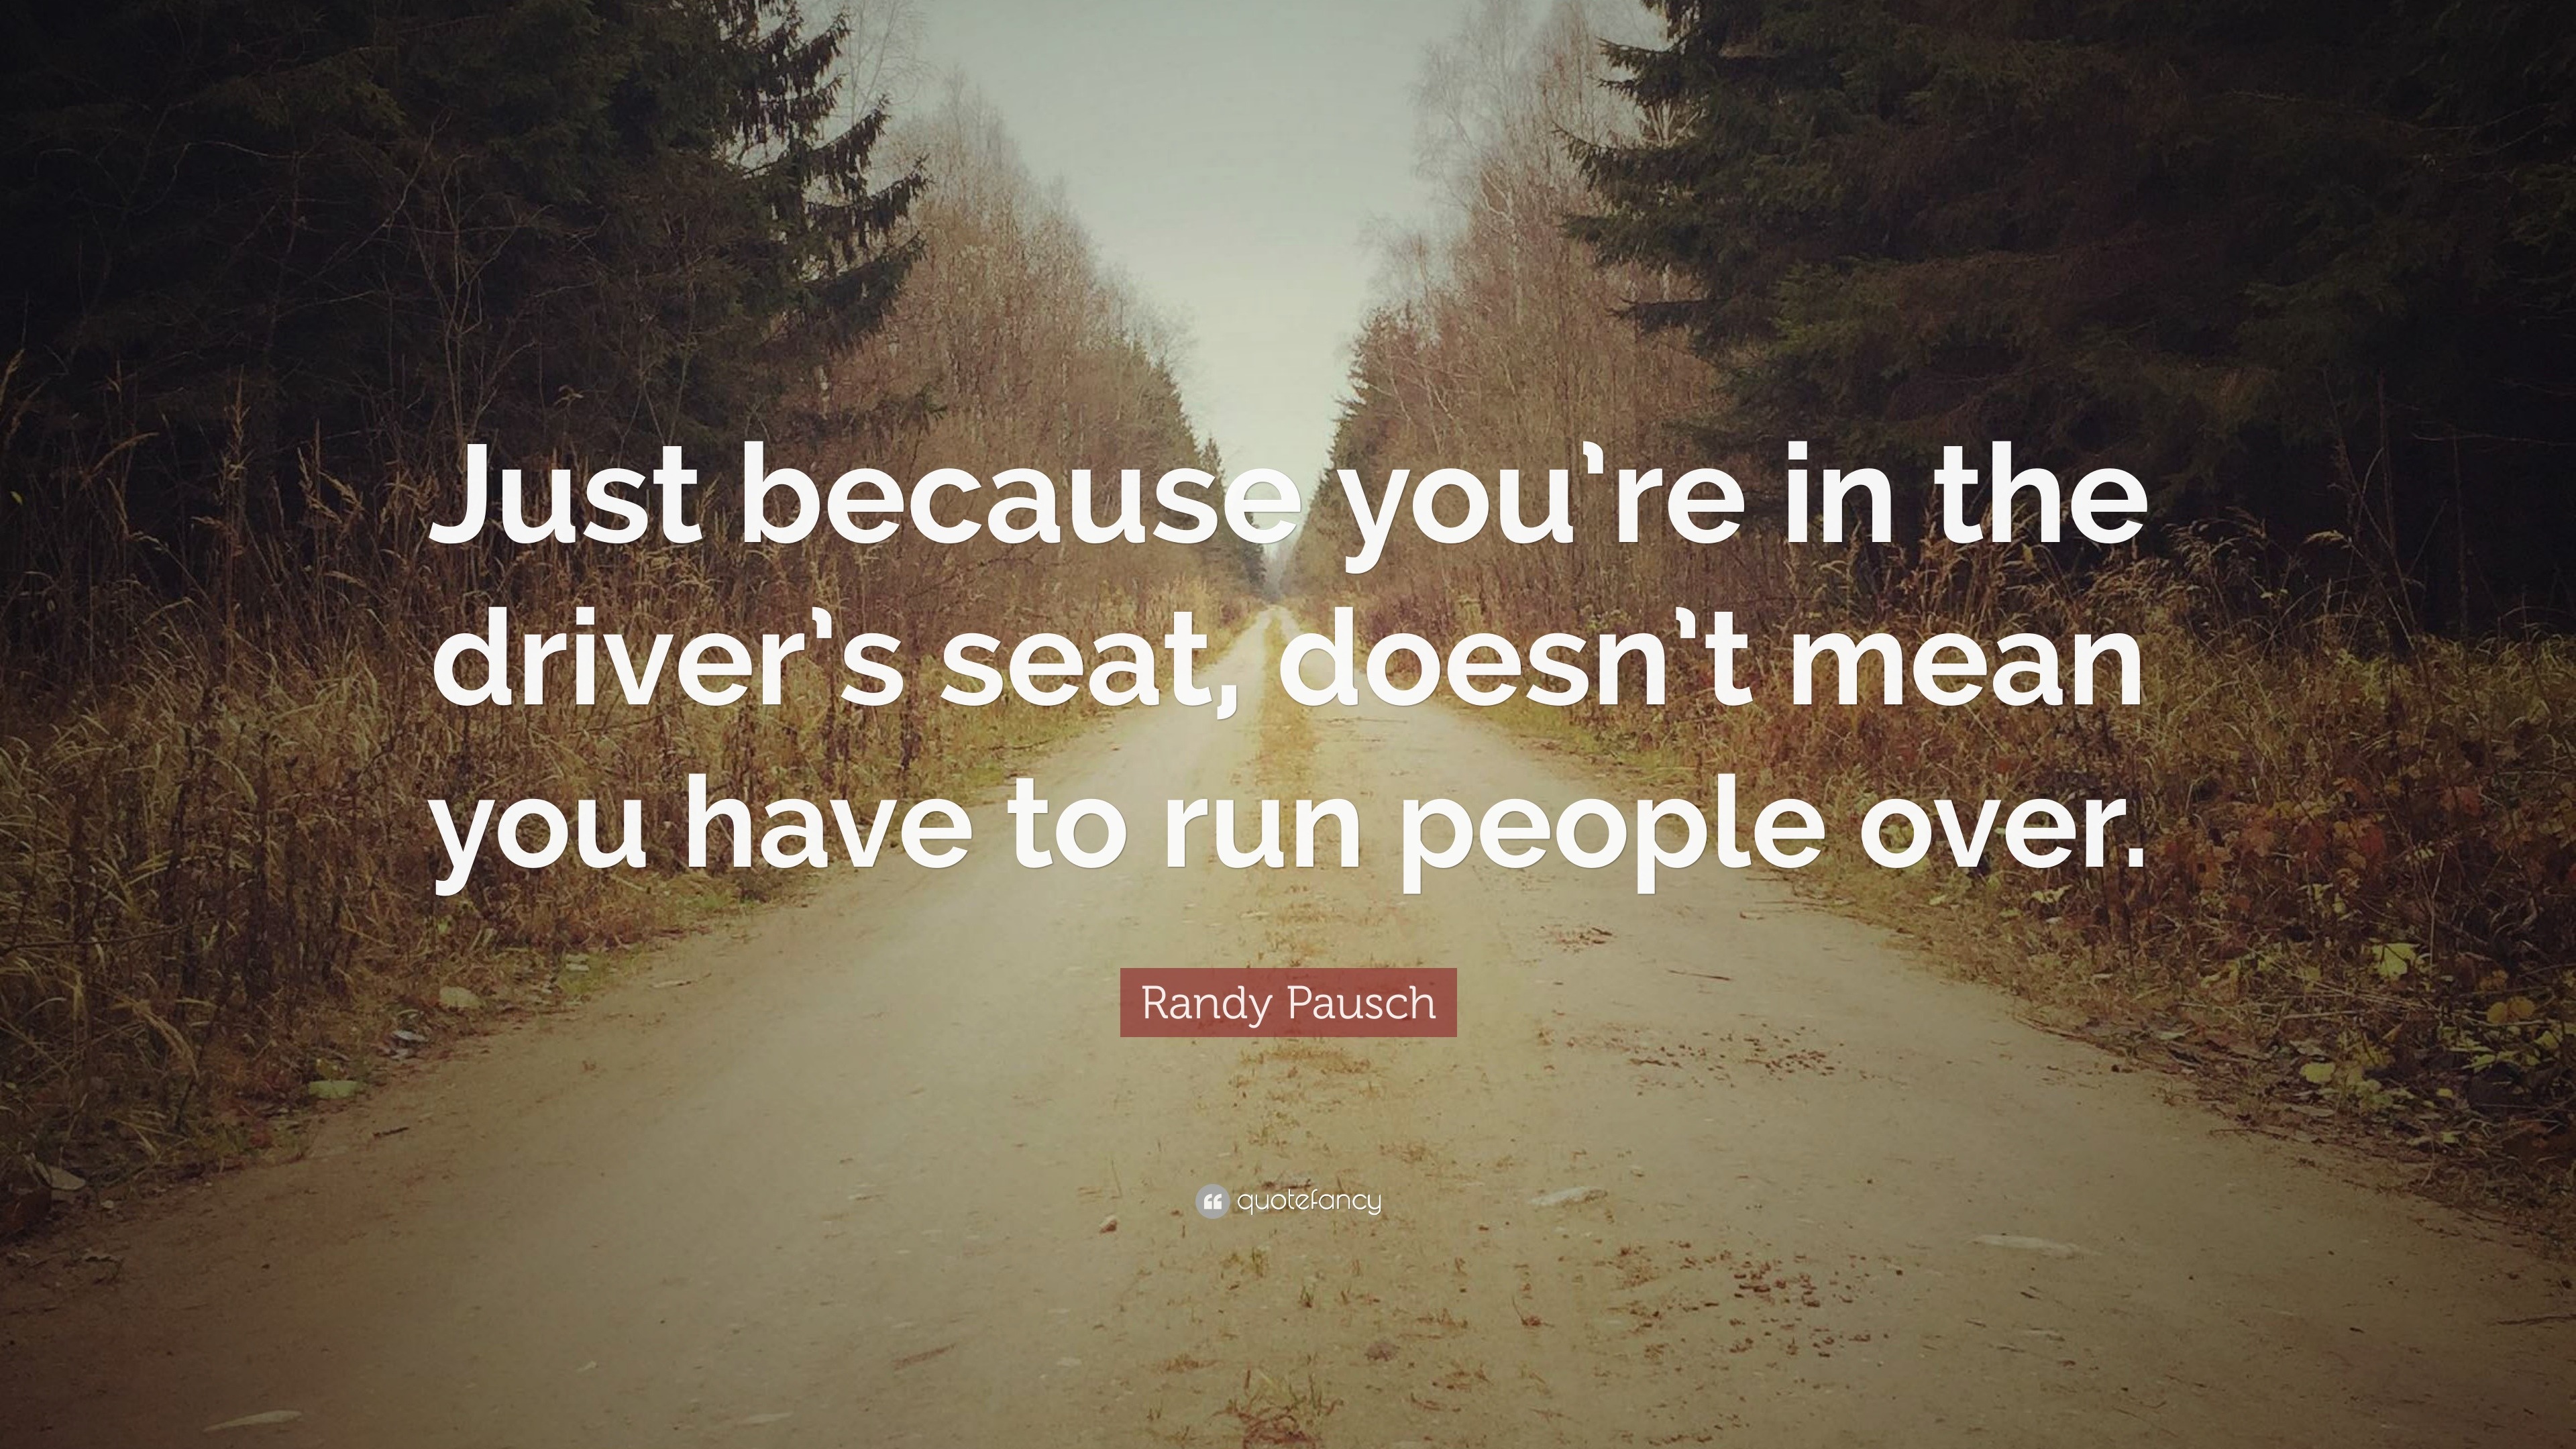 Randy Pausch Quote Just Because You Re In The Driver S Seat Doesn T Mean You Have To Run People Over 12 Wallpapers Quotefancy